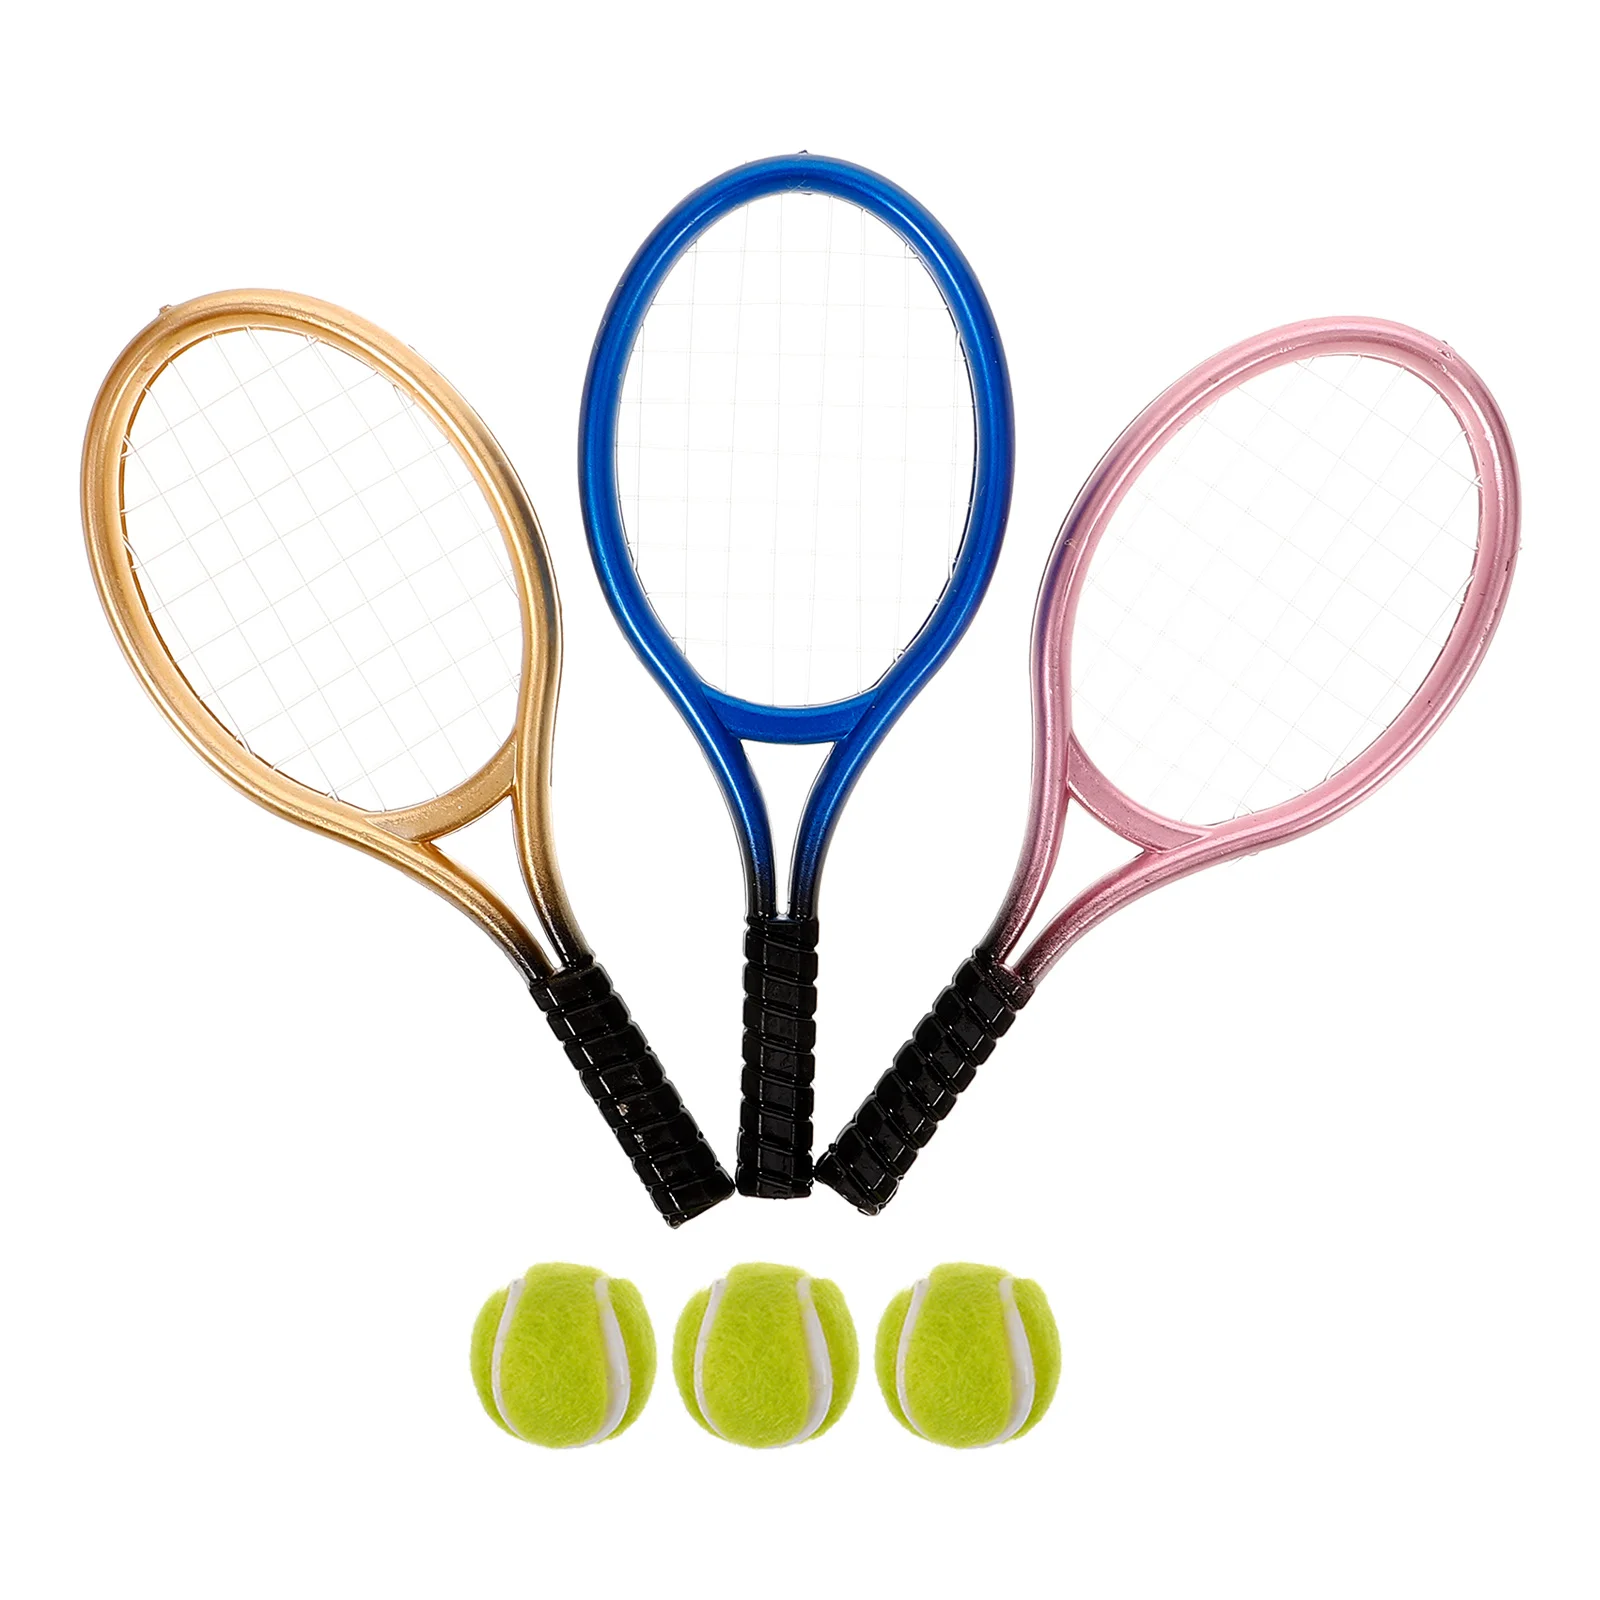 

3 Sets Simulated Tennis Mini House Tool Decor Racket Model for Layout Decorative DIY Toy Props